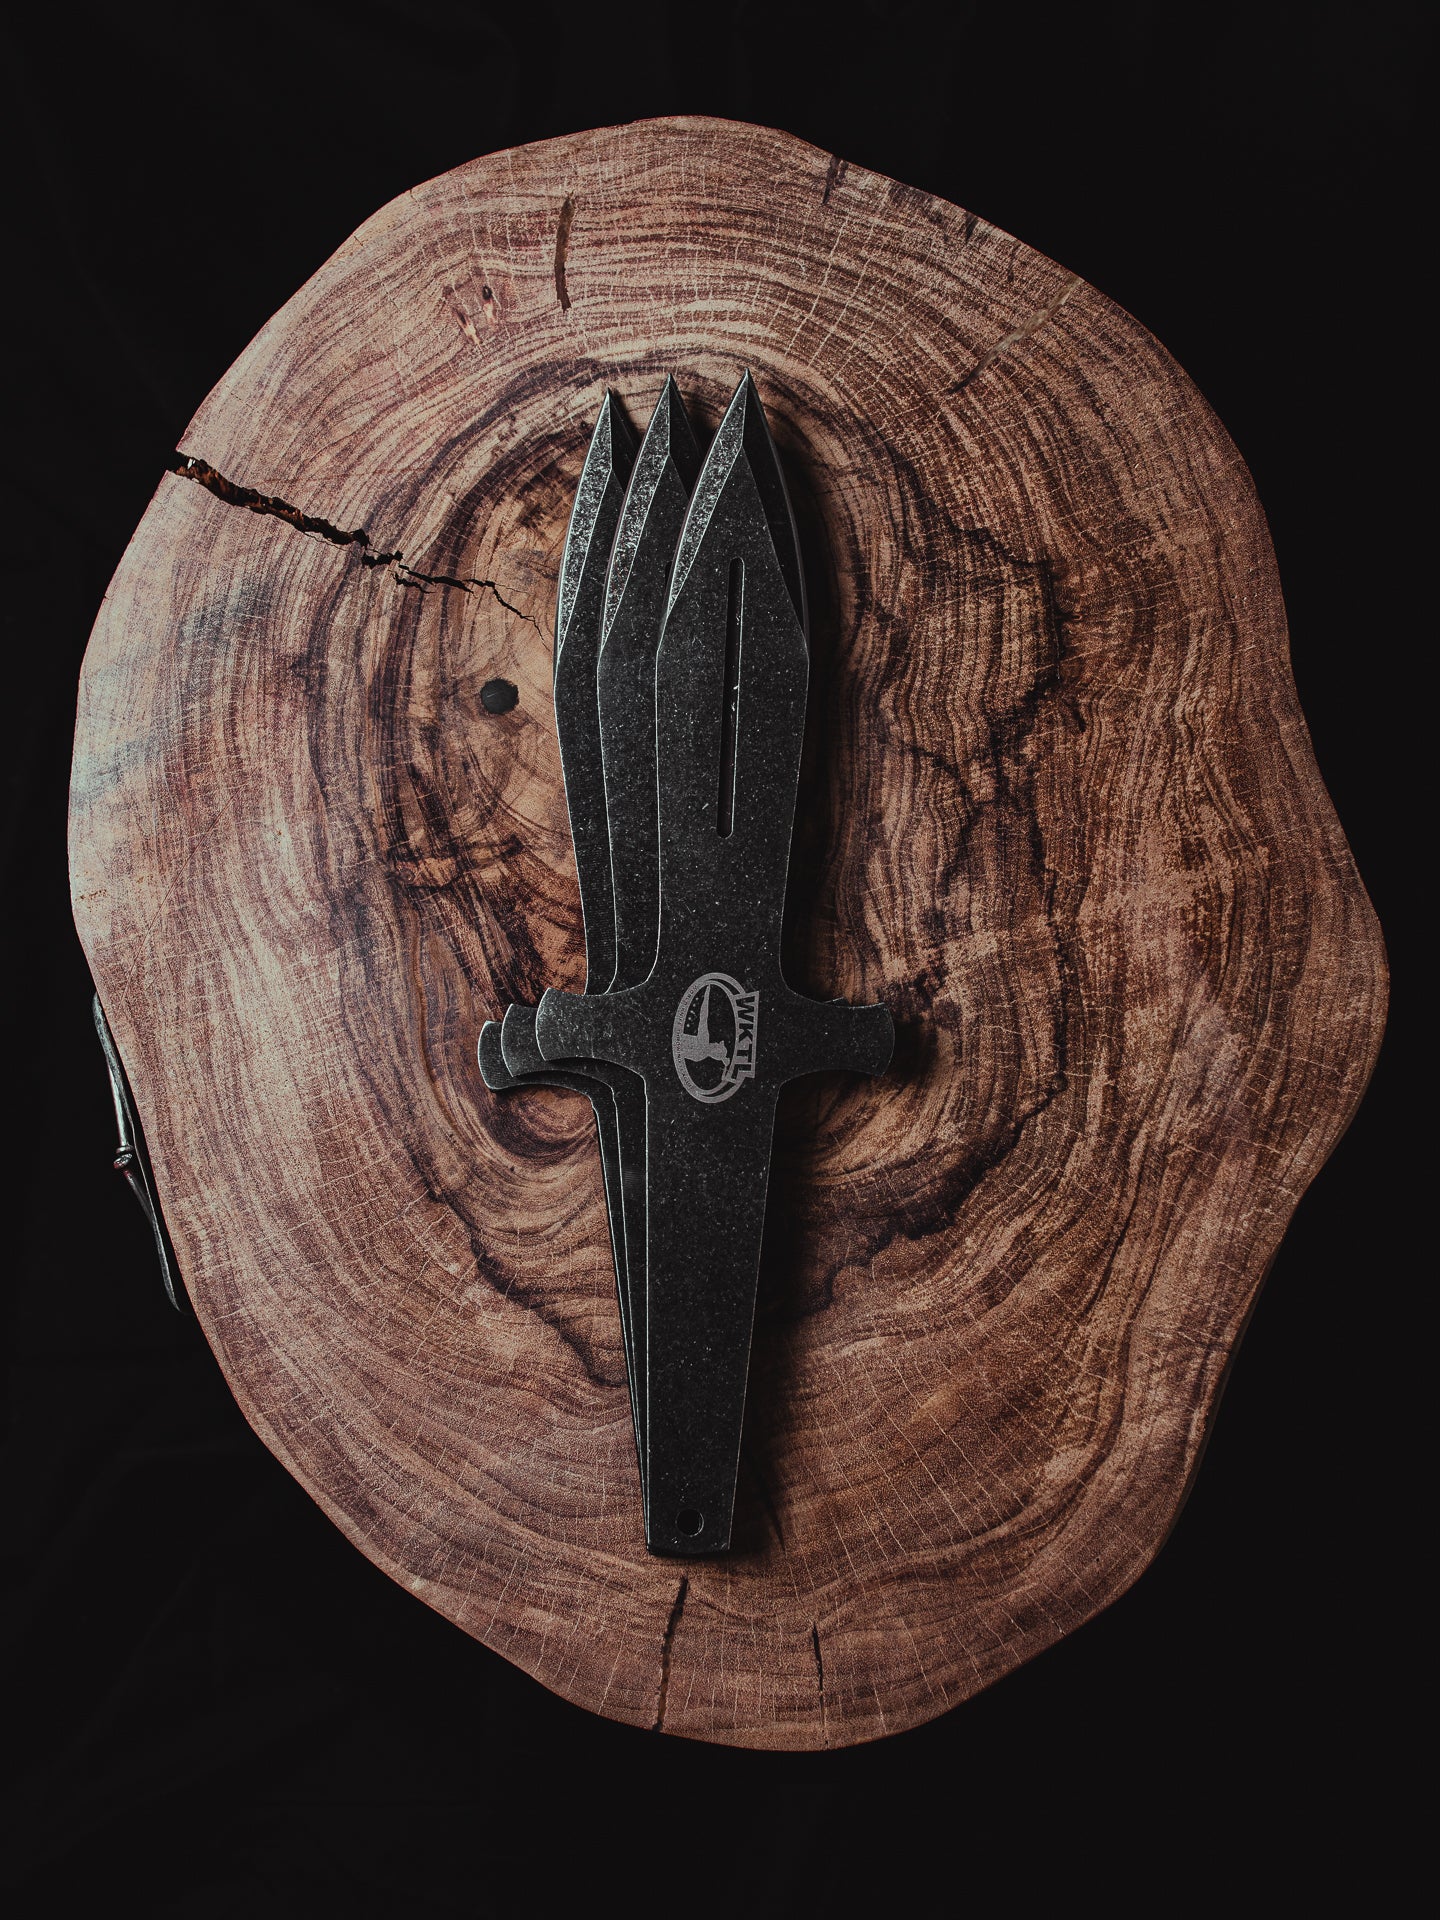 World Knife Throwing League (WKTL) Certified Competition Throwing Knife, The Crusader